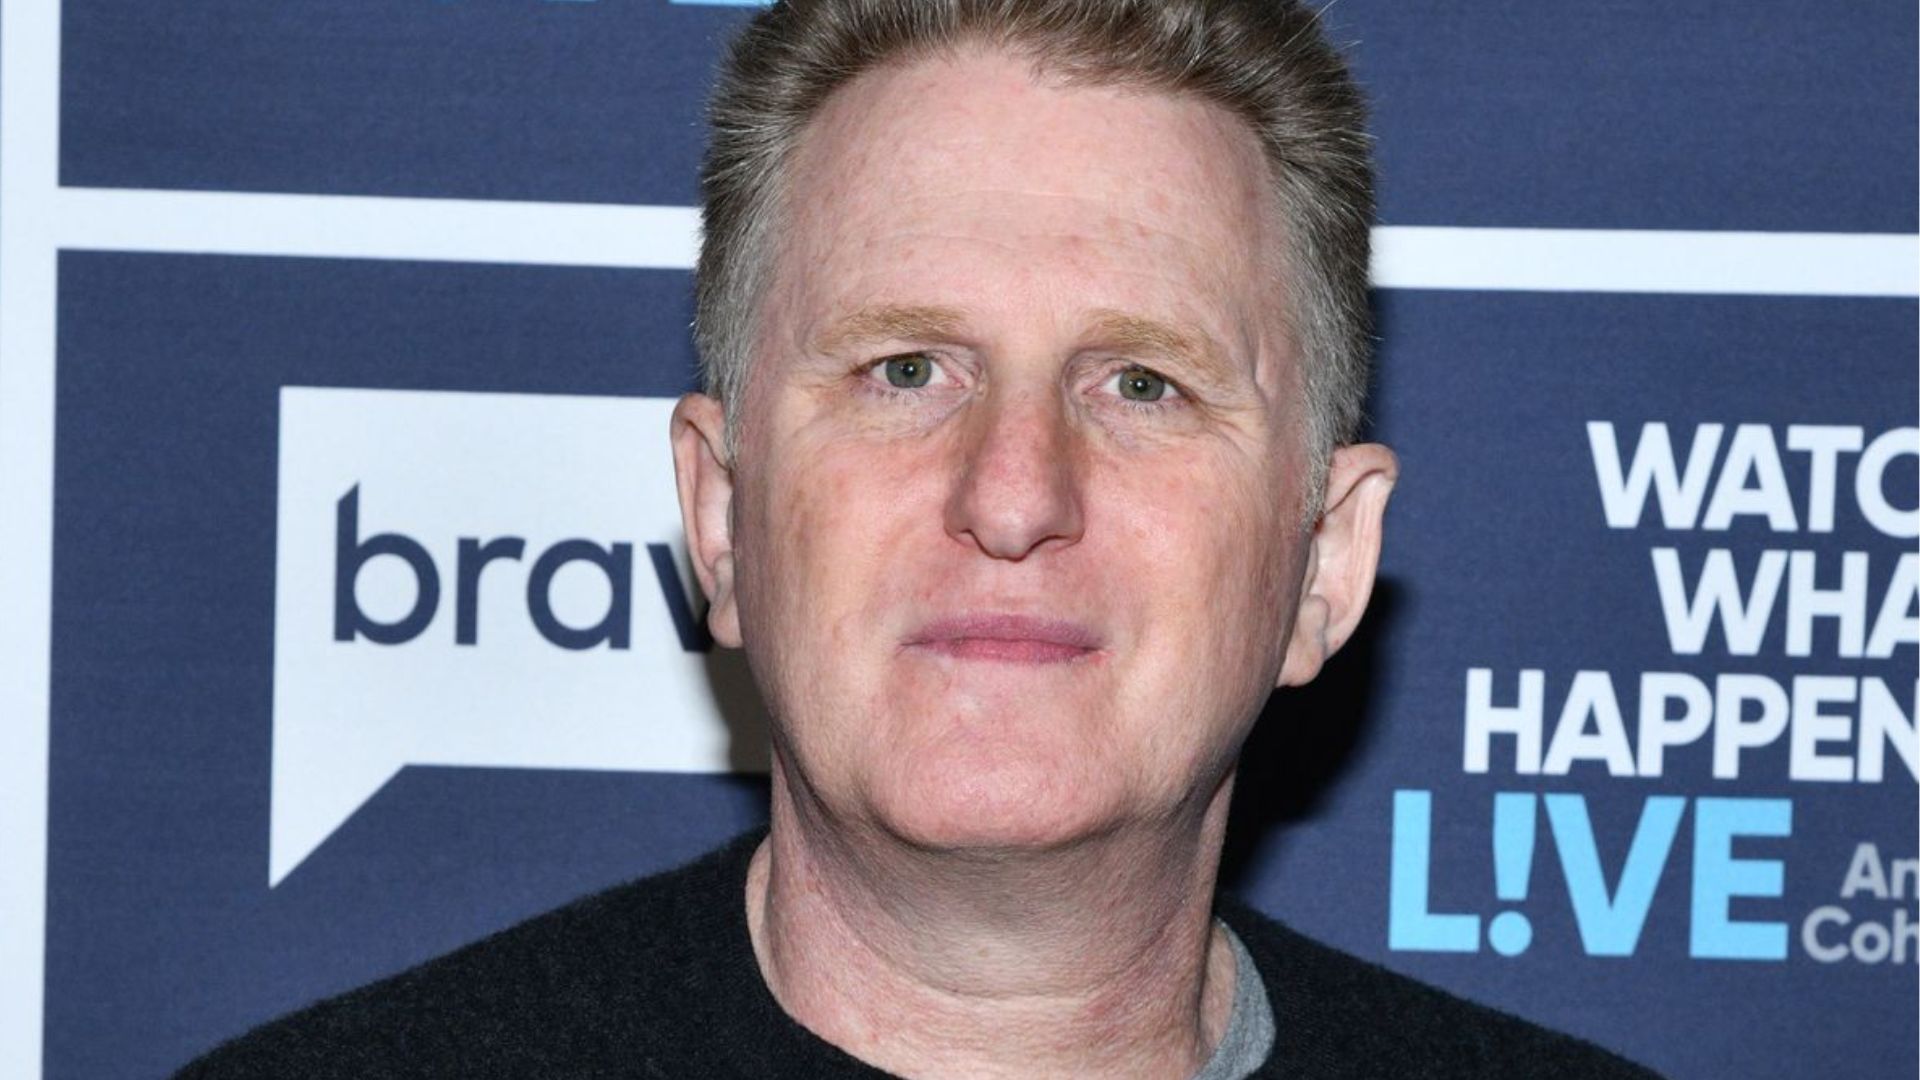 Michael Rapaport - An American Actor, Comedian And Director